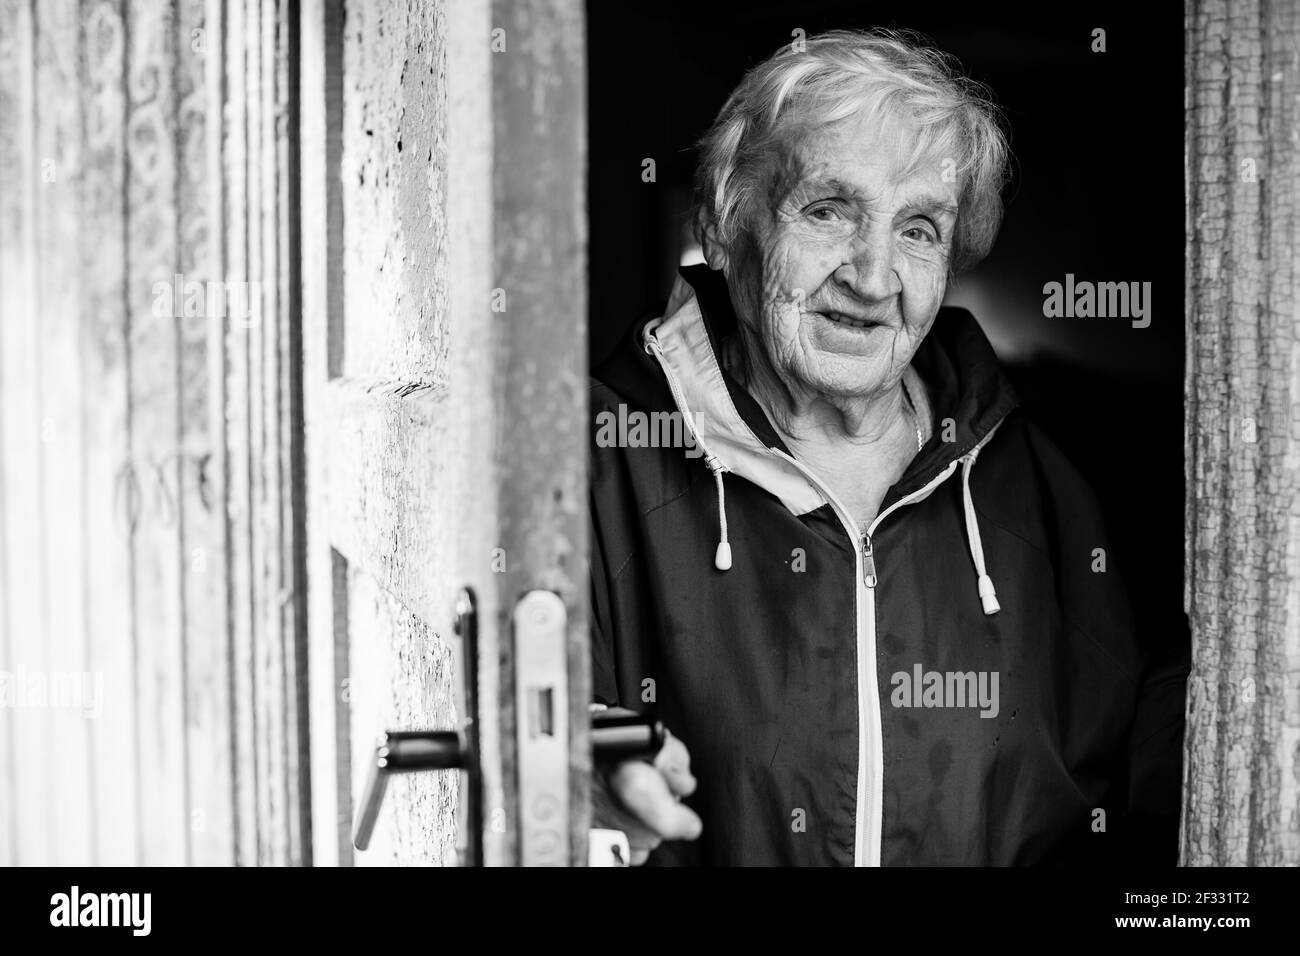 An old woman peeks out from behind door of house. Black and white photo. Stock Photo